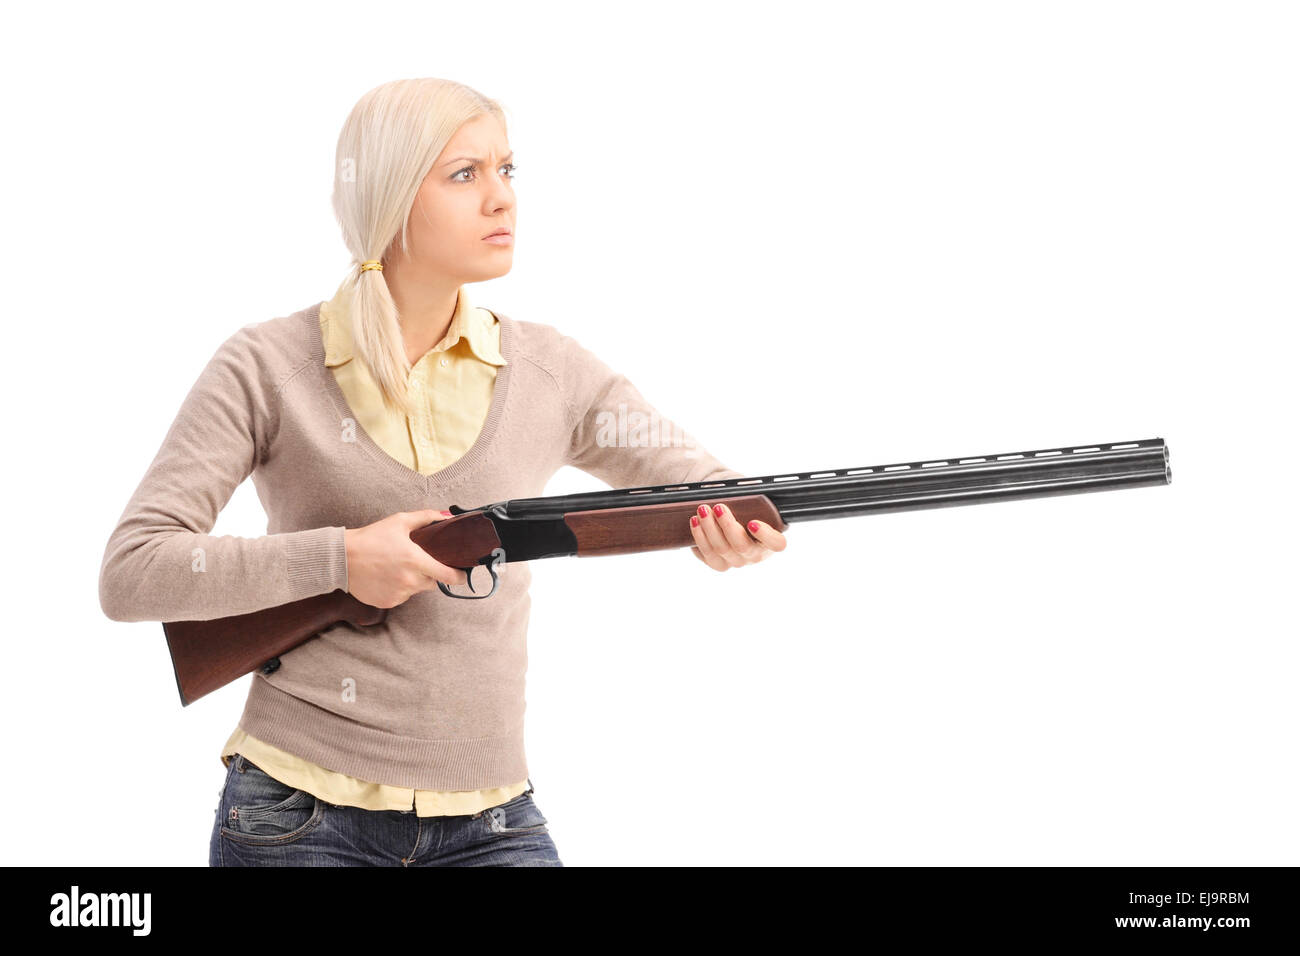 Furious young blond woman holding a shotgun ready to shoot isolated on white background Stock Photo